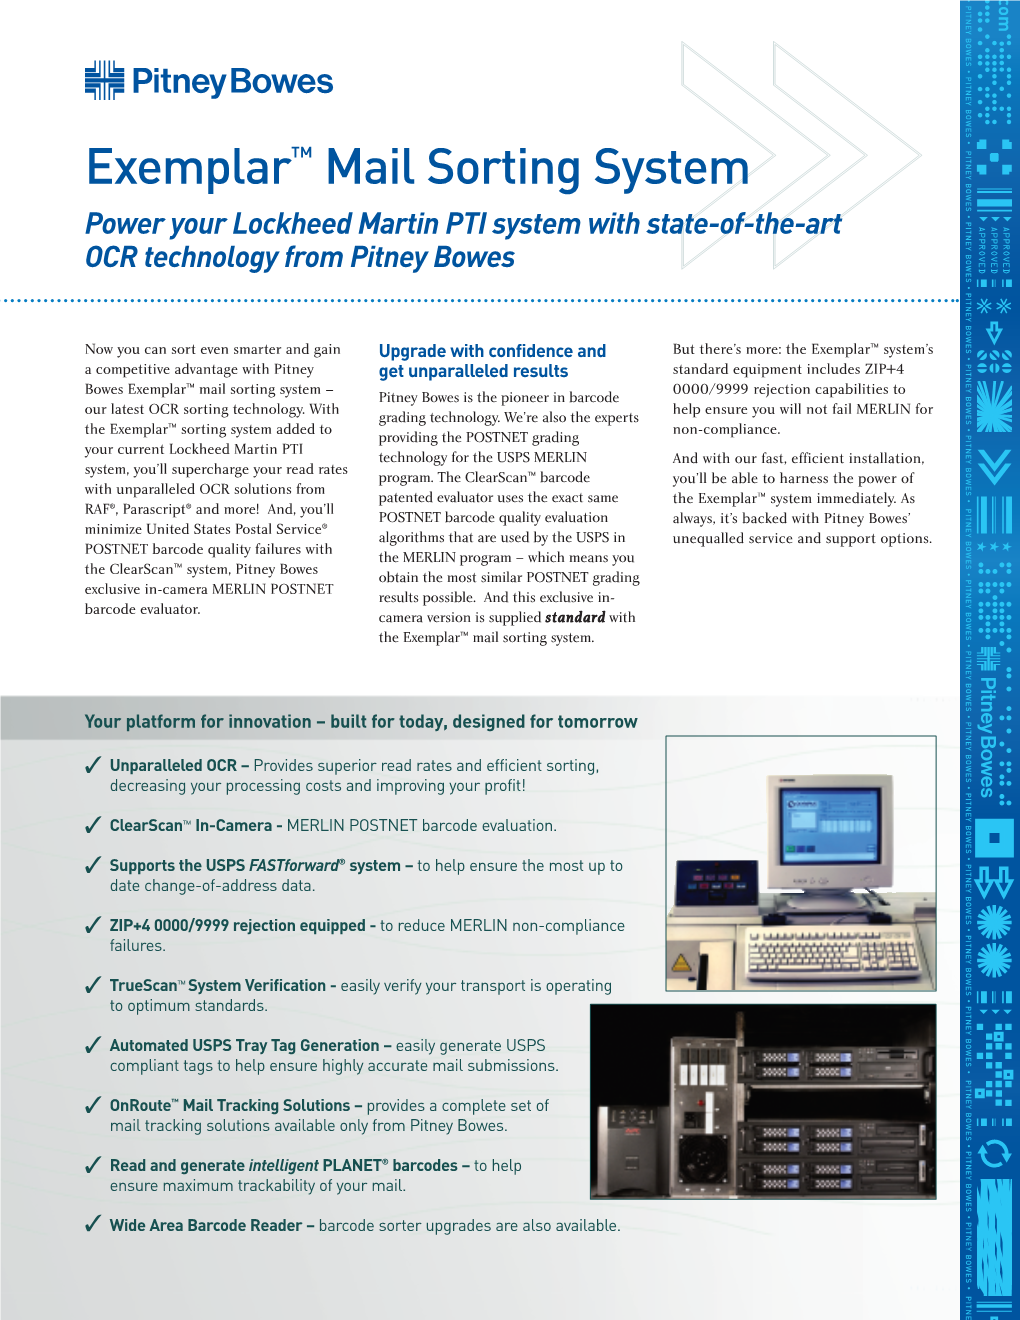 Exemplar™ Mail Sorting System Power Your Lockheed Martin PTI System with State-Of-The-Art OCR Technology from Pitney Bowes